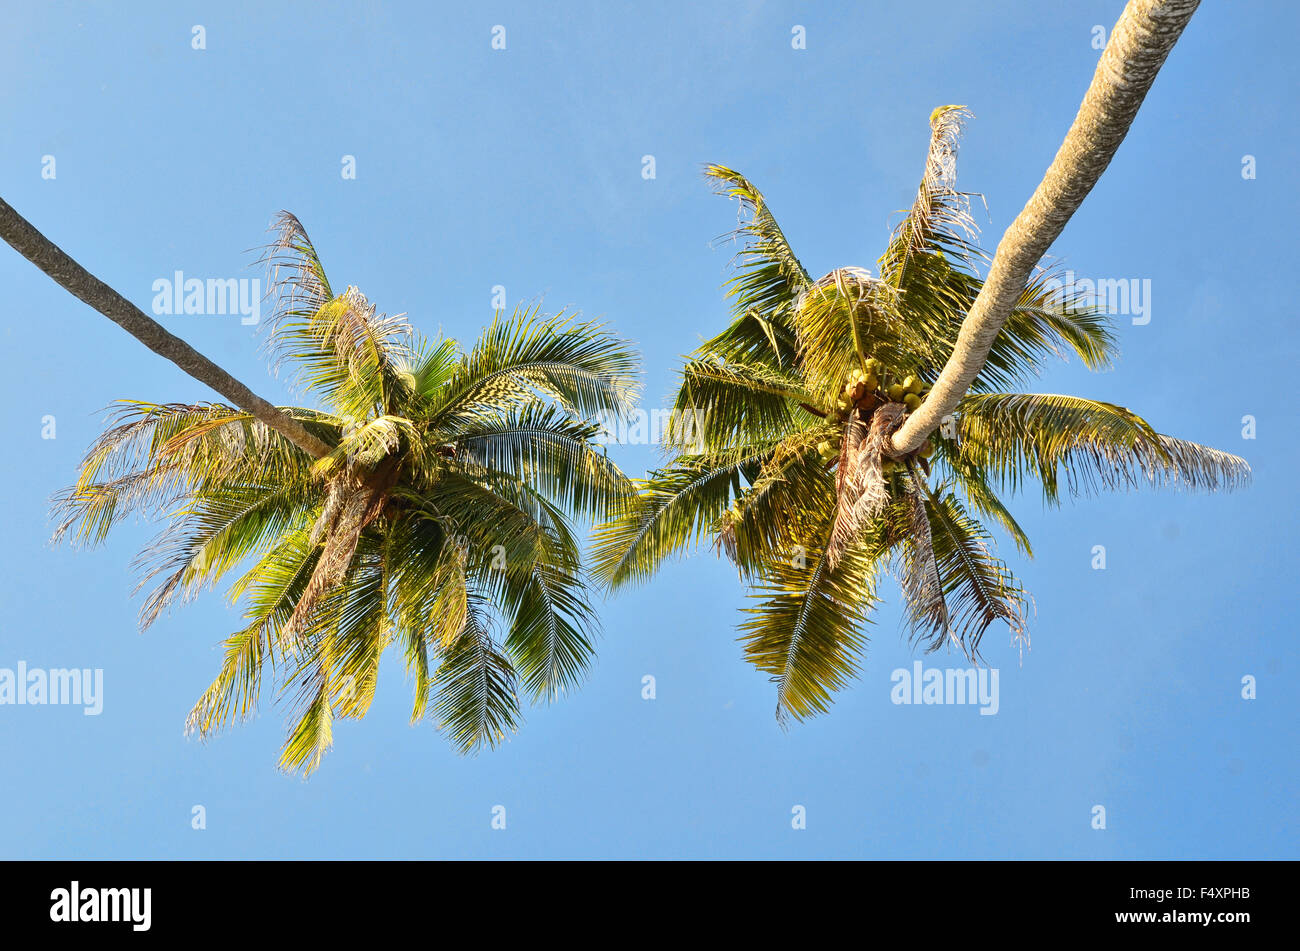 Two coconut trees from below Stock Photo